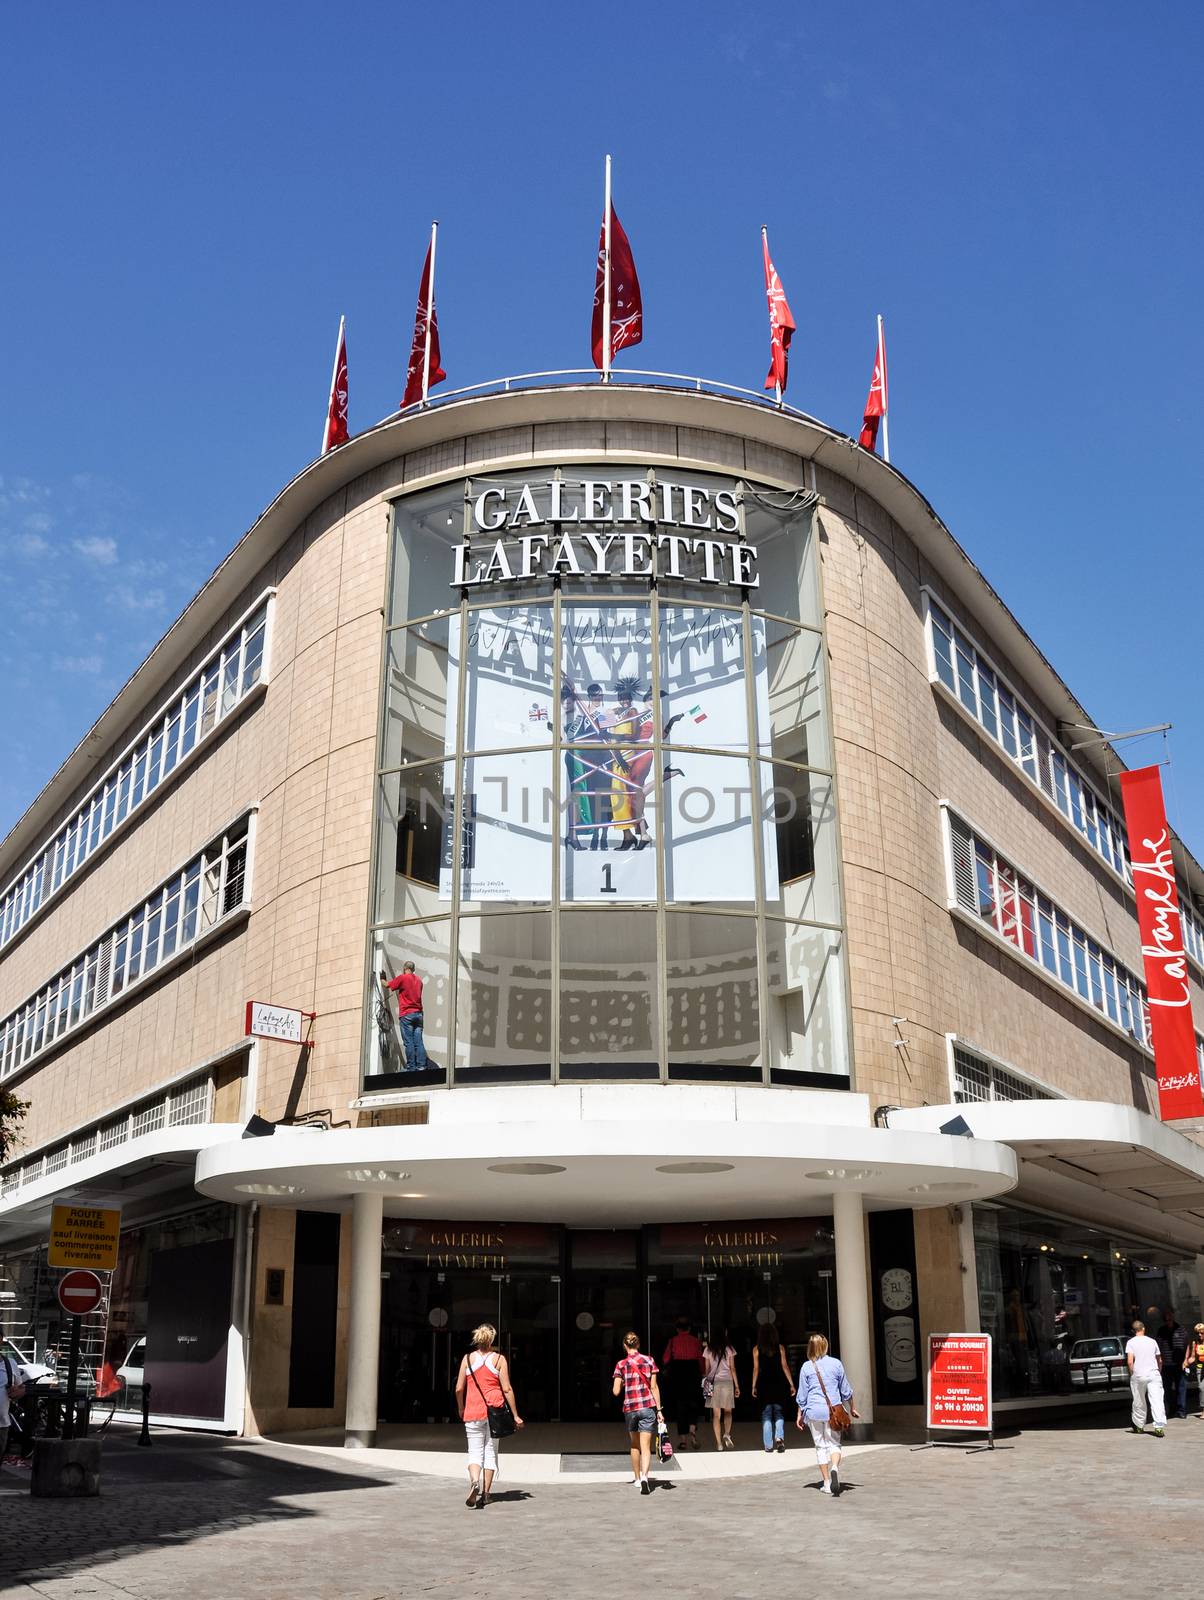 The Galeries Lafayette department store in Nantes, France by dutourdumonde